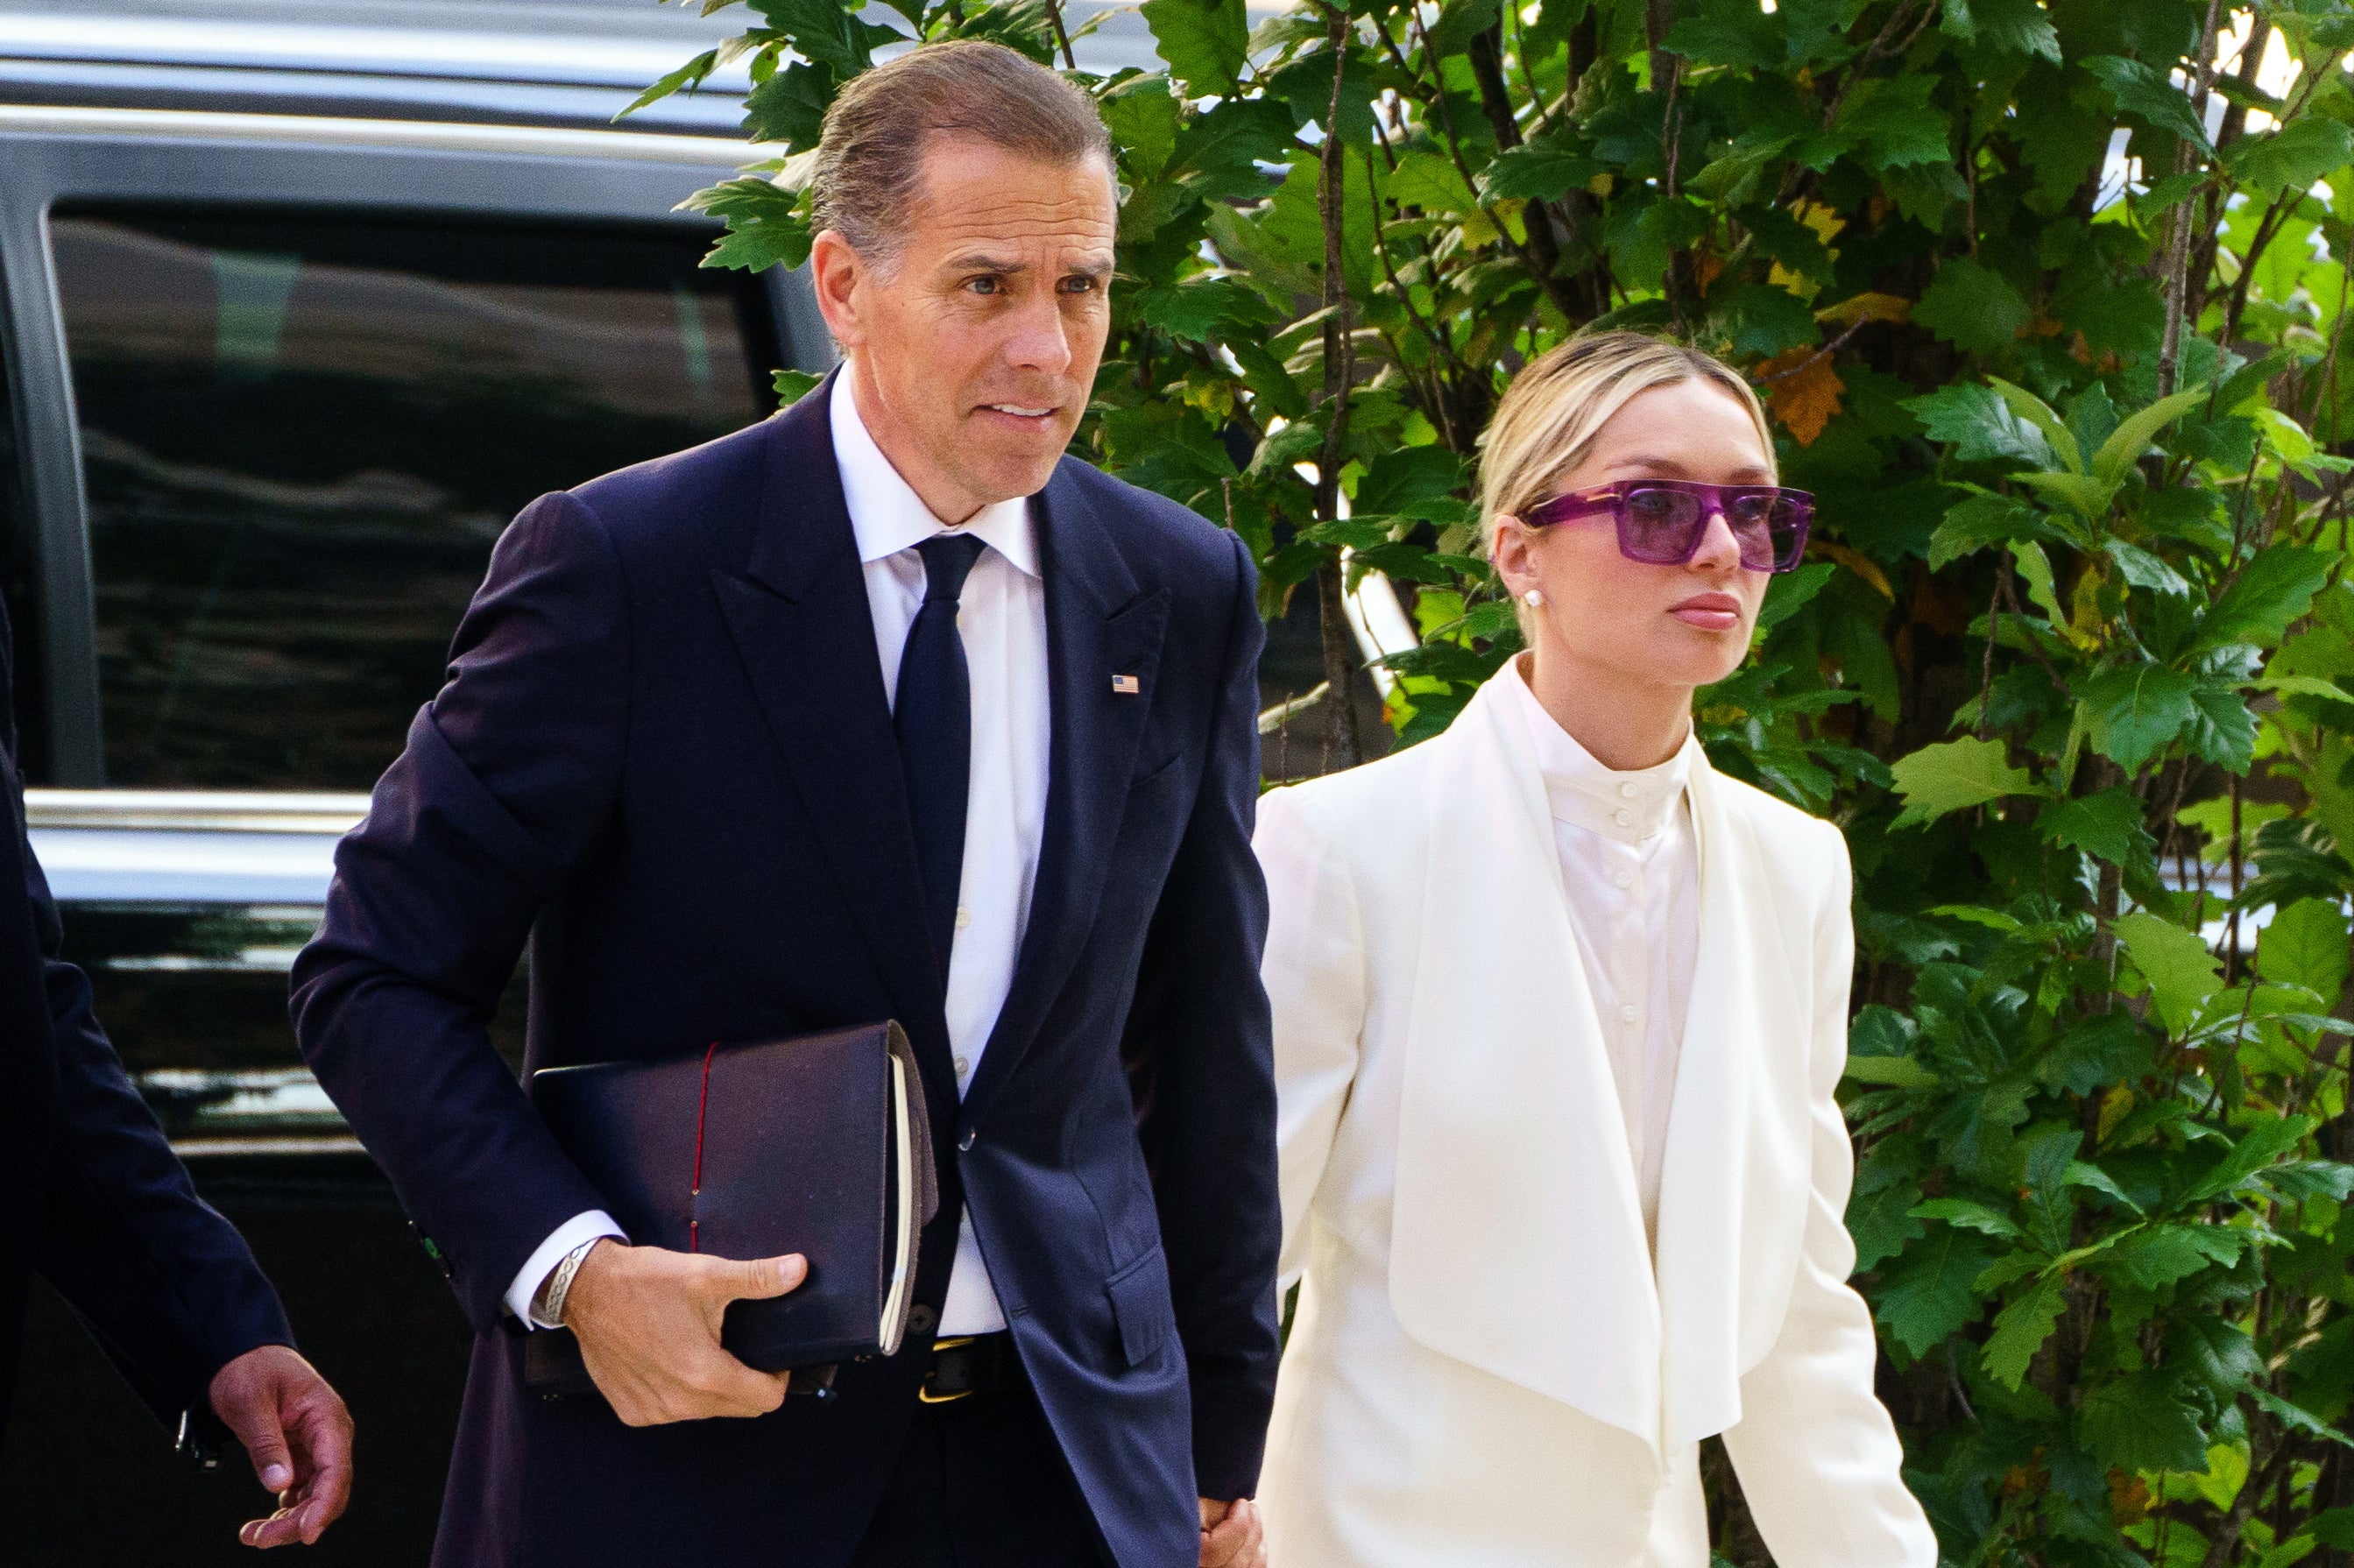 Hunter Biden and his wife Melissa Cohen Biden arrive at court on 7 June as the trial was nearing its end